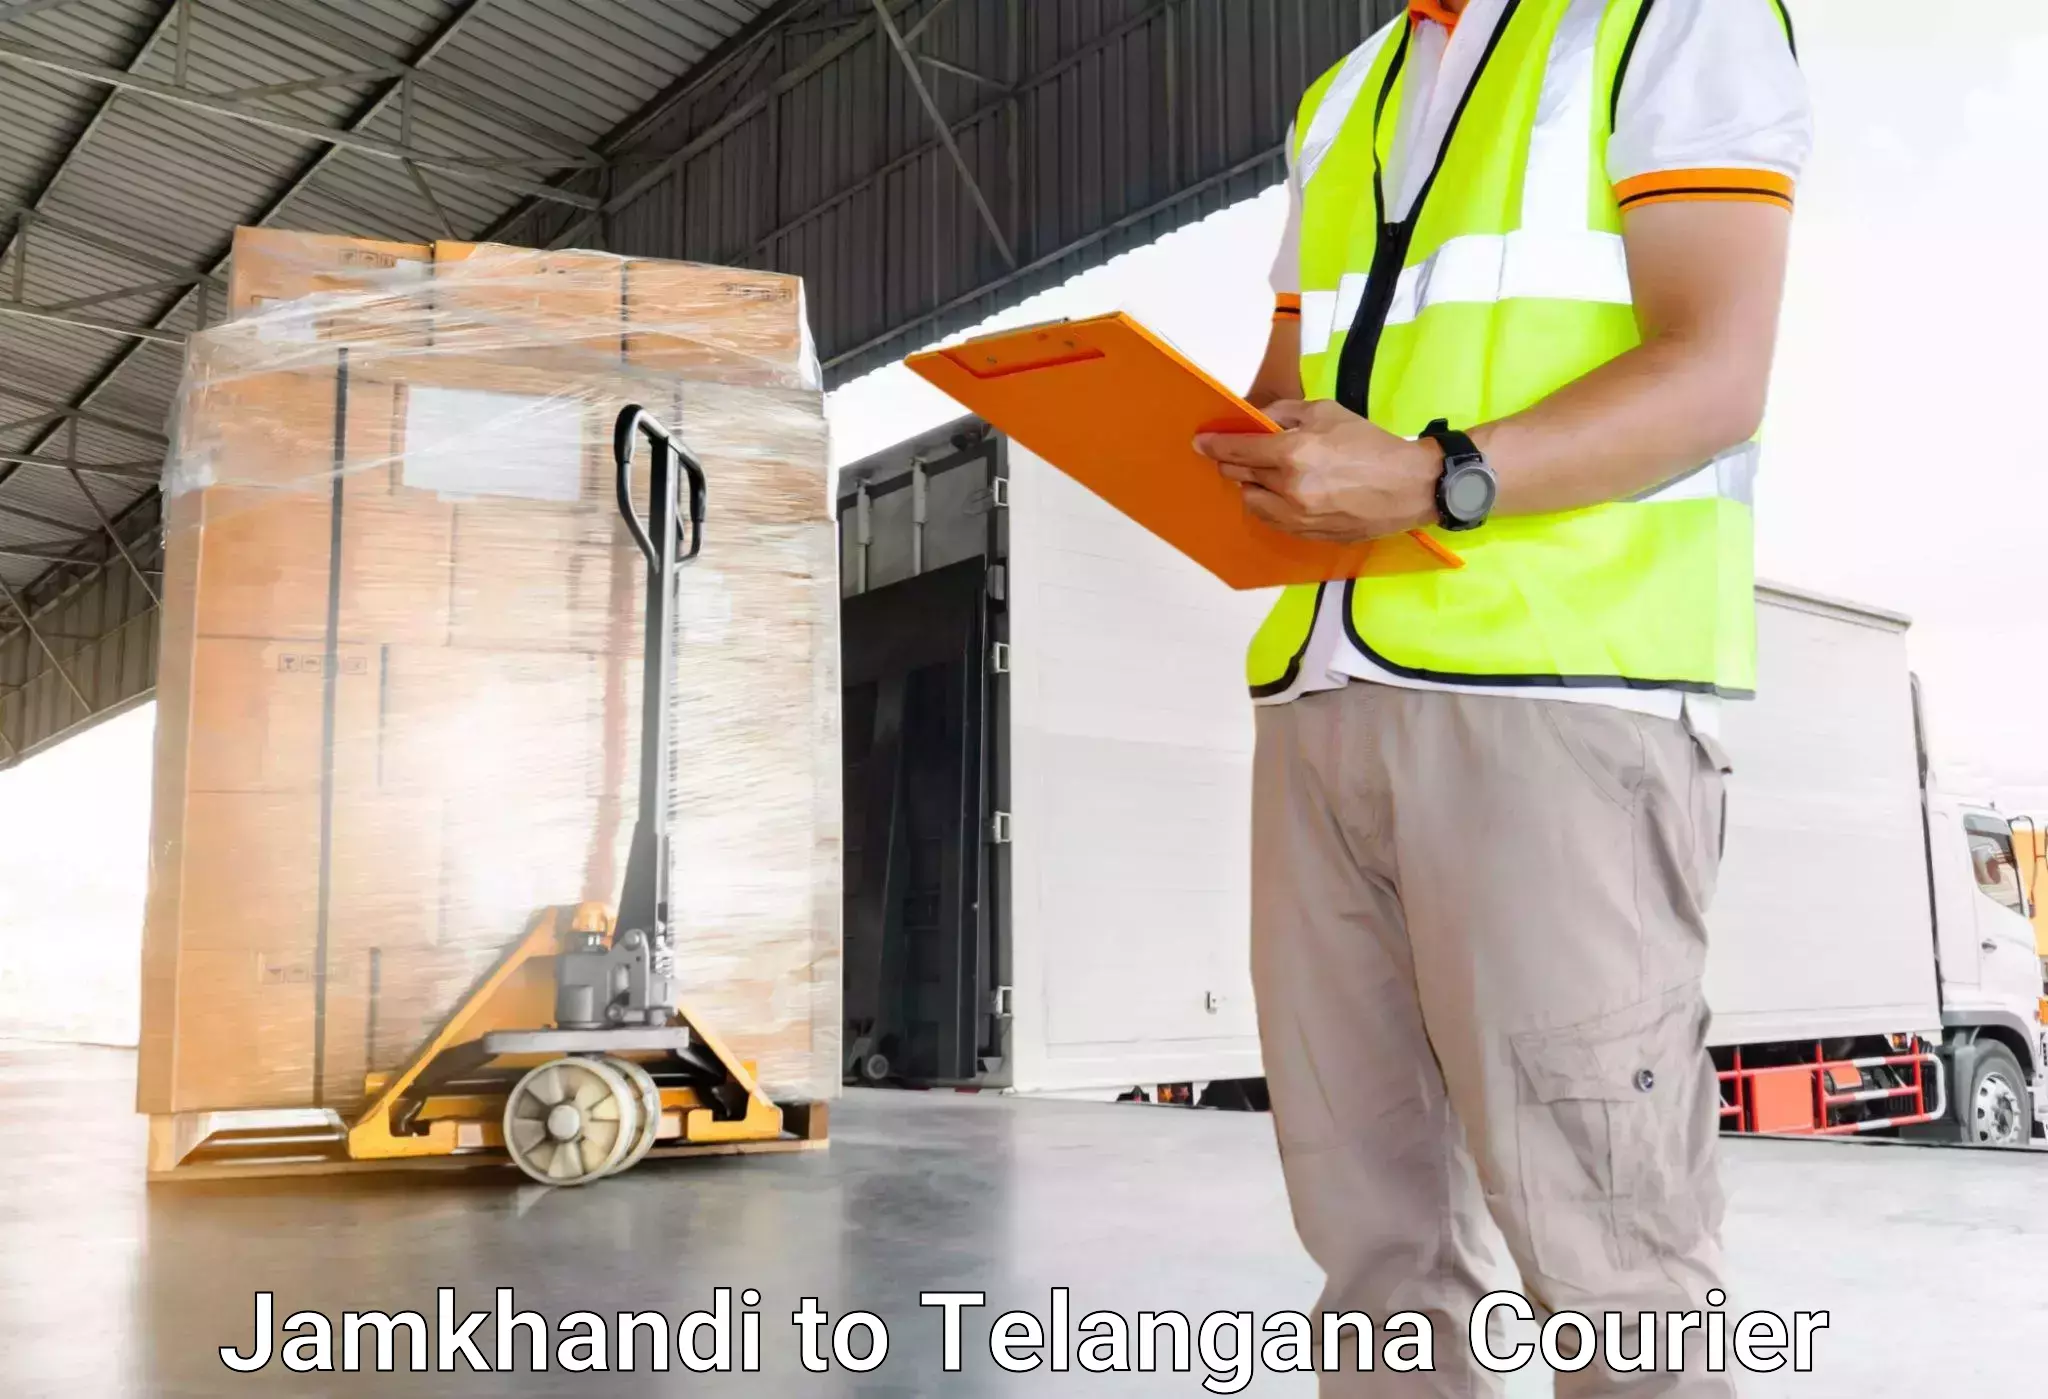 Luggage transport consulting in Jamkhandi to Medchal